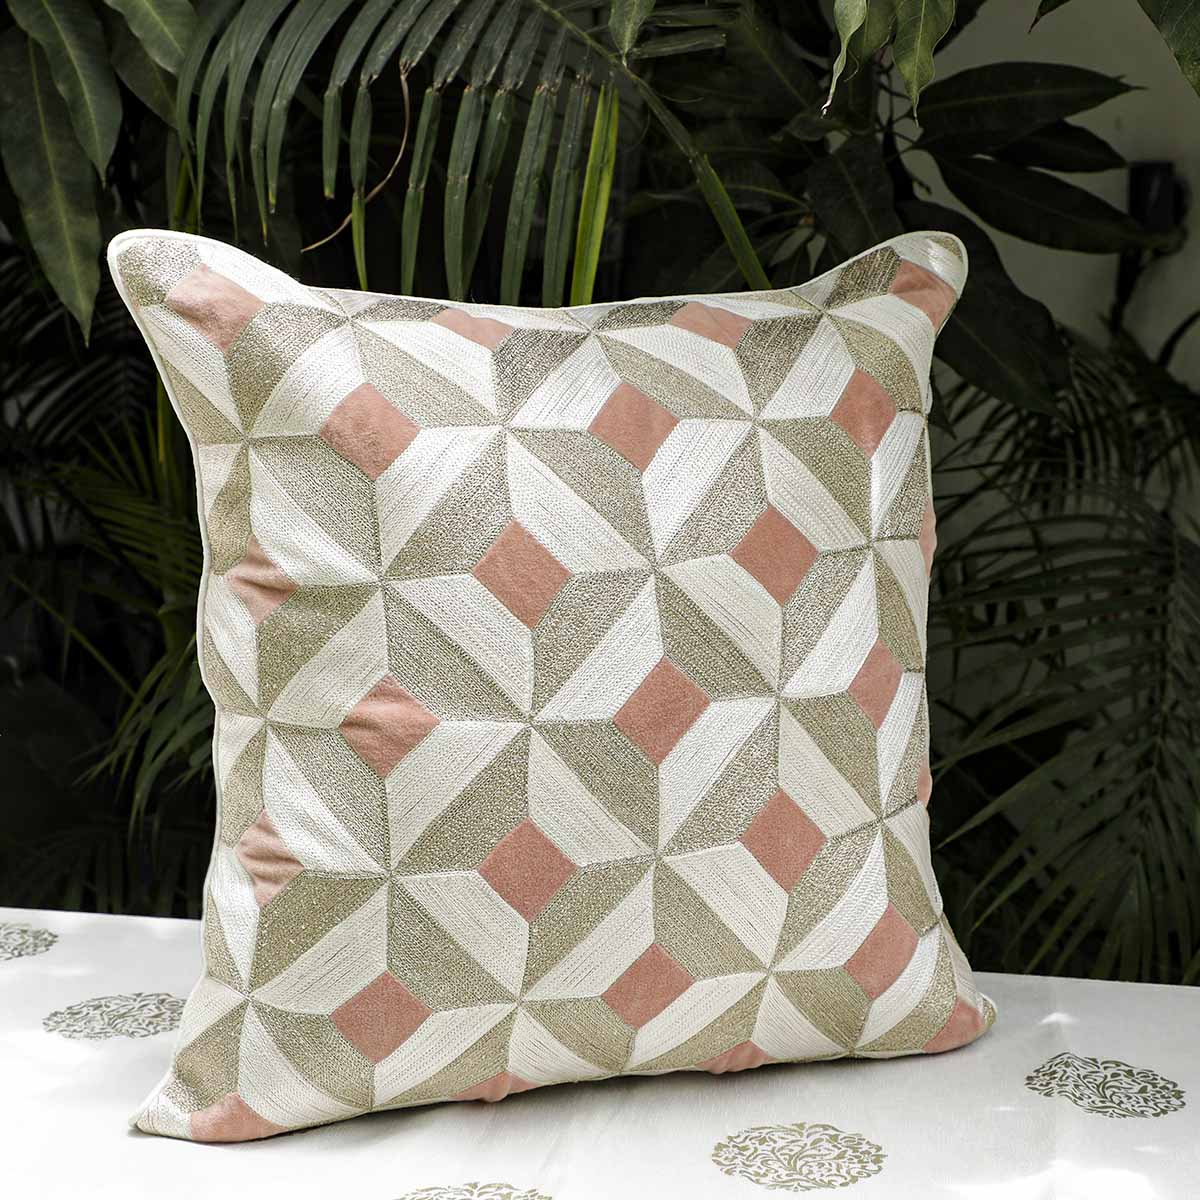 Harlequin Embroidery Cushion Cover 18 x 18 Inch